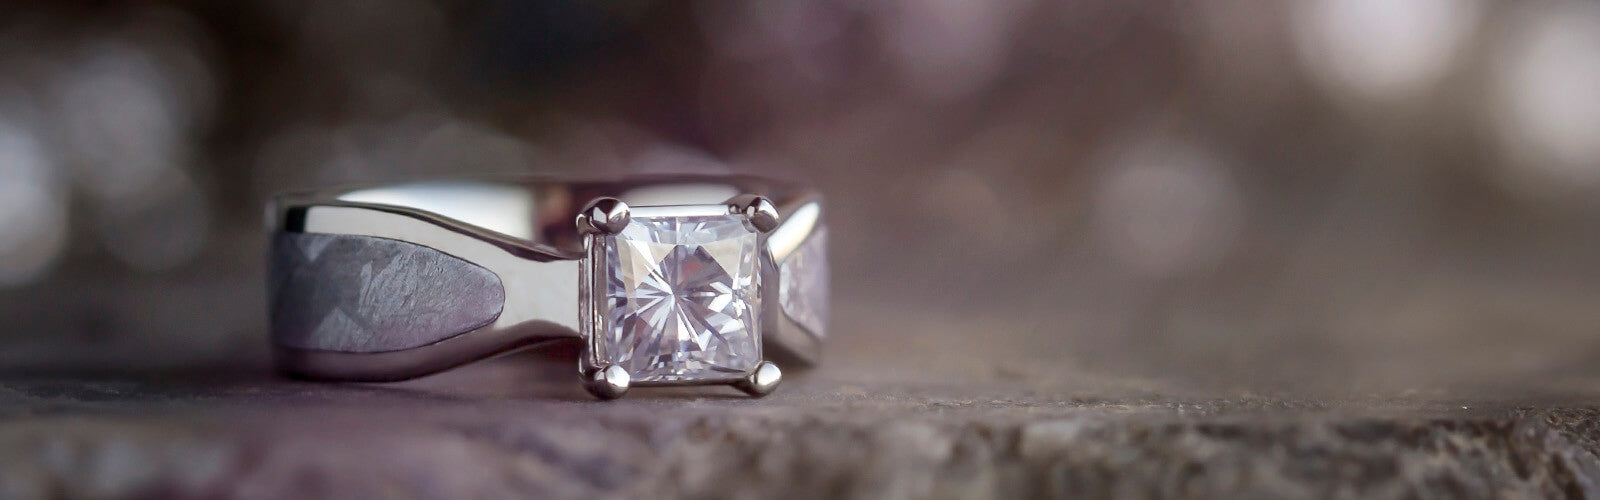 Moissanite Engagement Rings from Jewelry by Johan